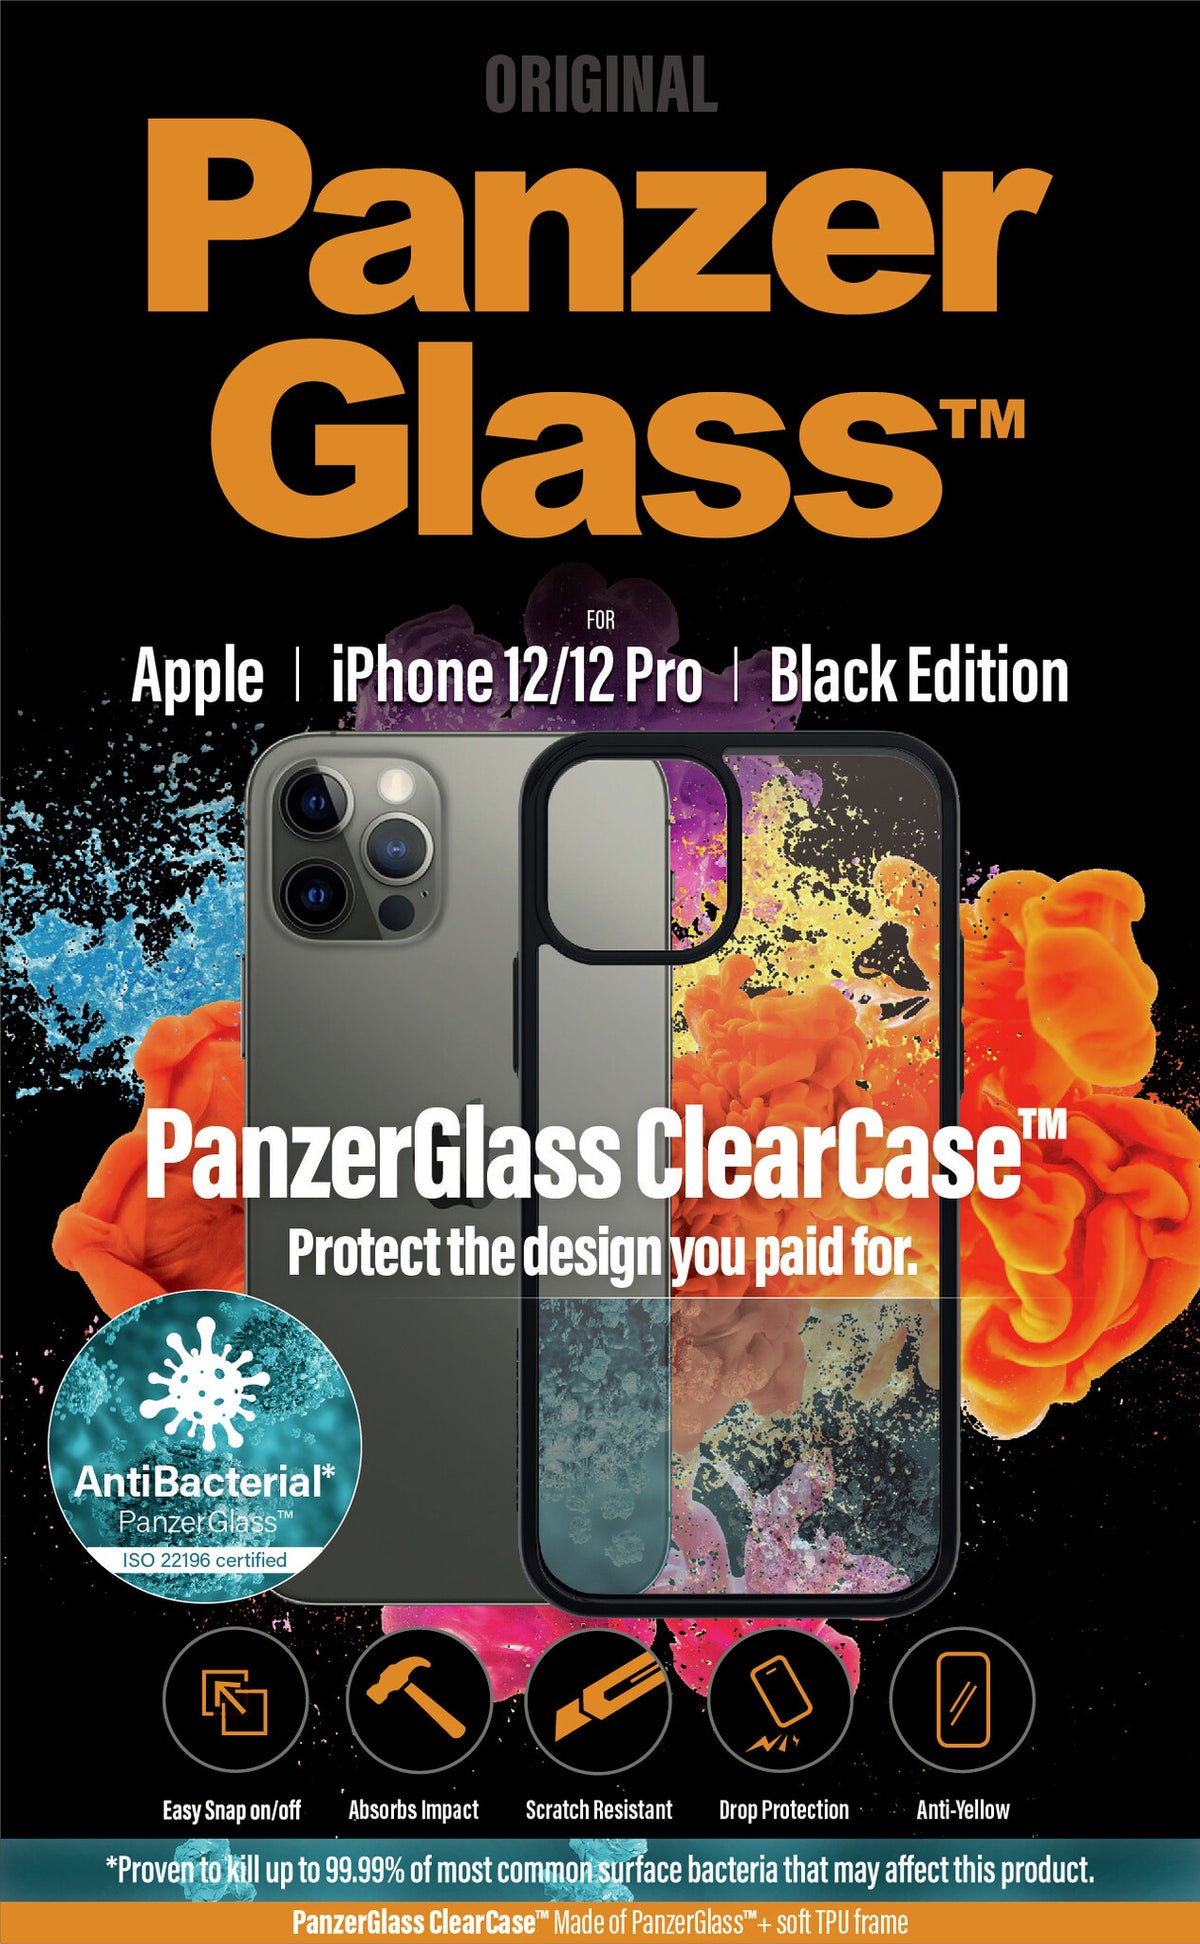 PanzerGlass ® ClearCase for iPhone 12 / 12 Pro in Black